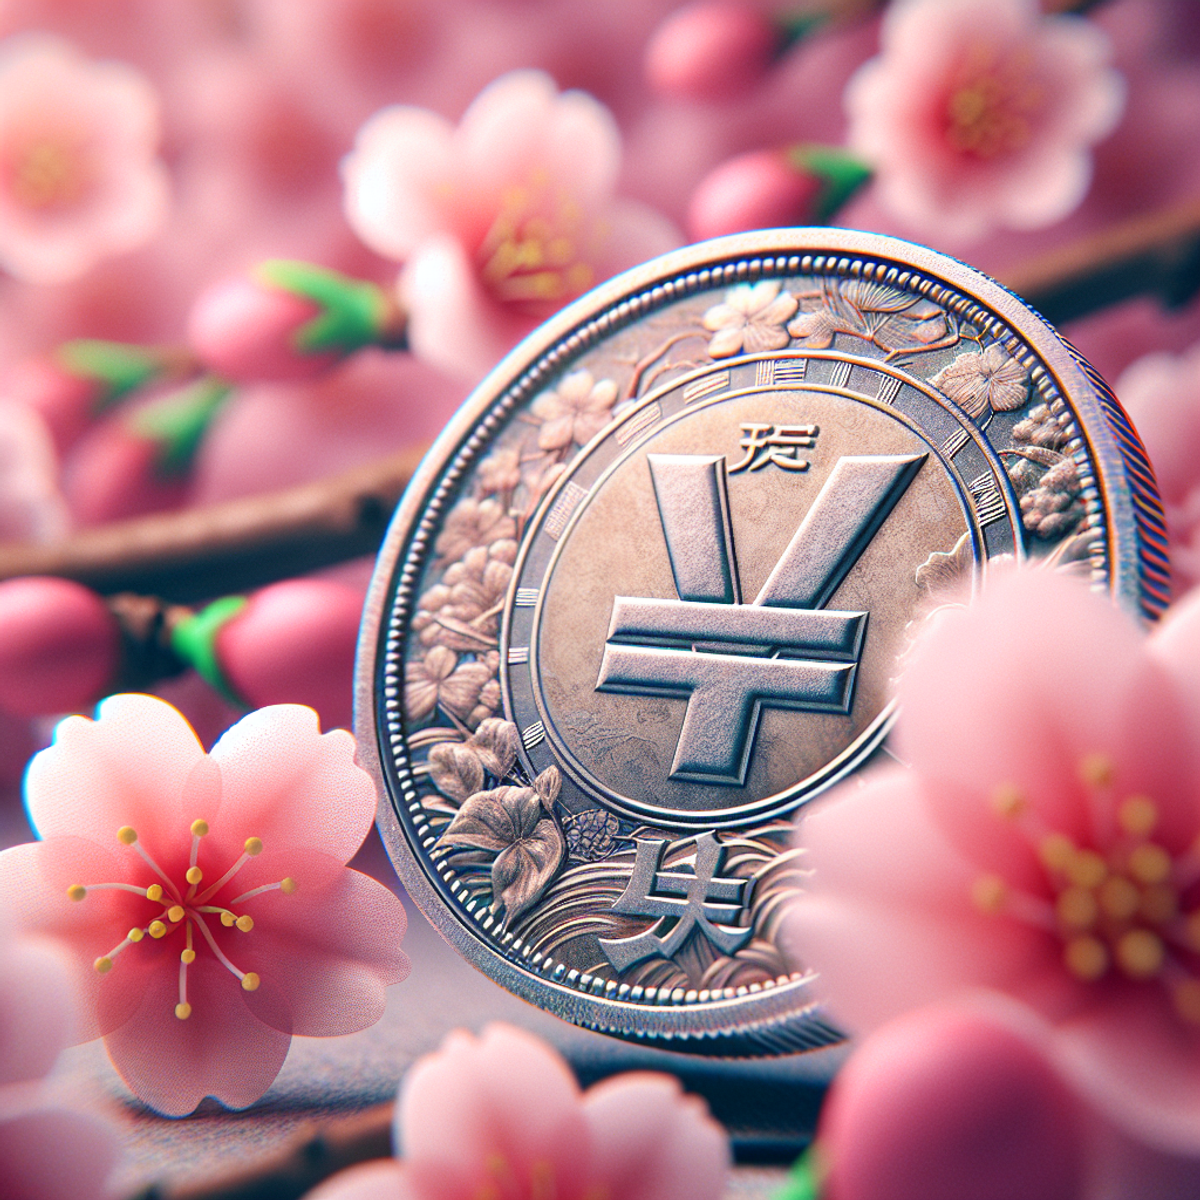 A close-up image of a Japanese yen coin with intricate details and symbols, surrounded by soft, blurred cherry blossoms.